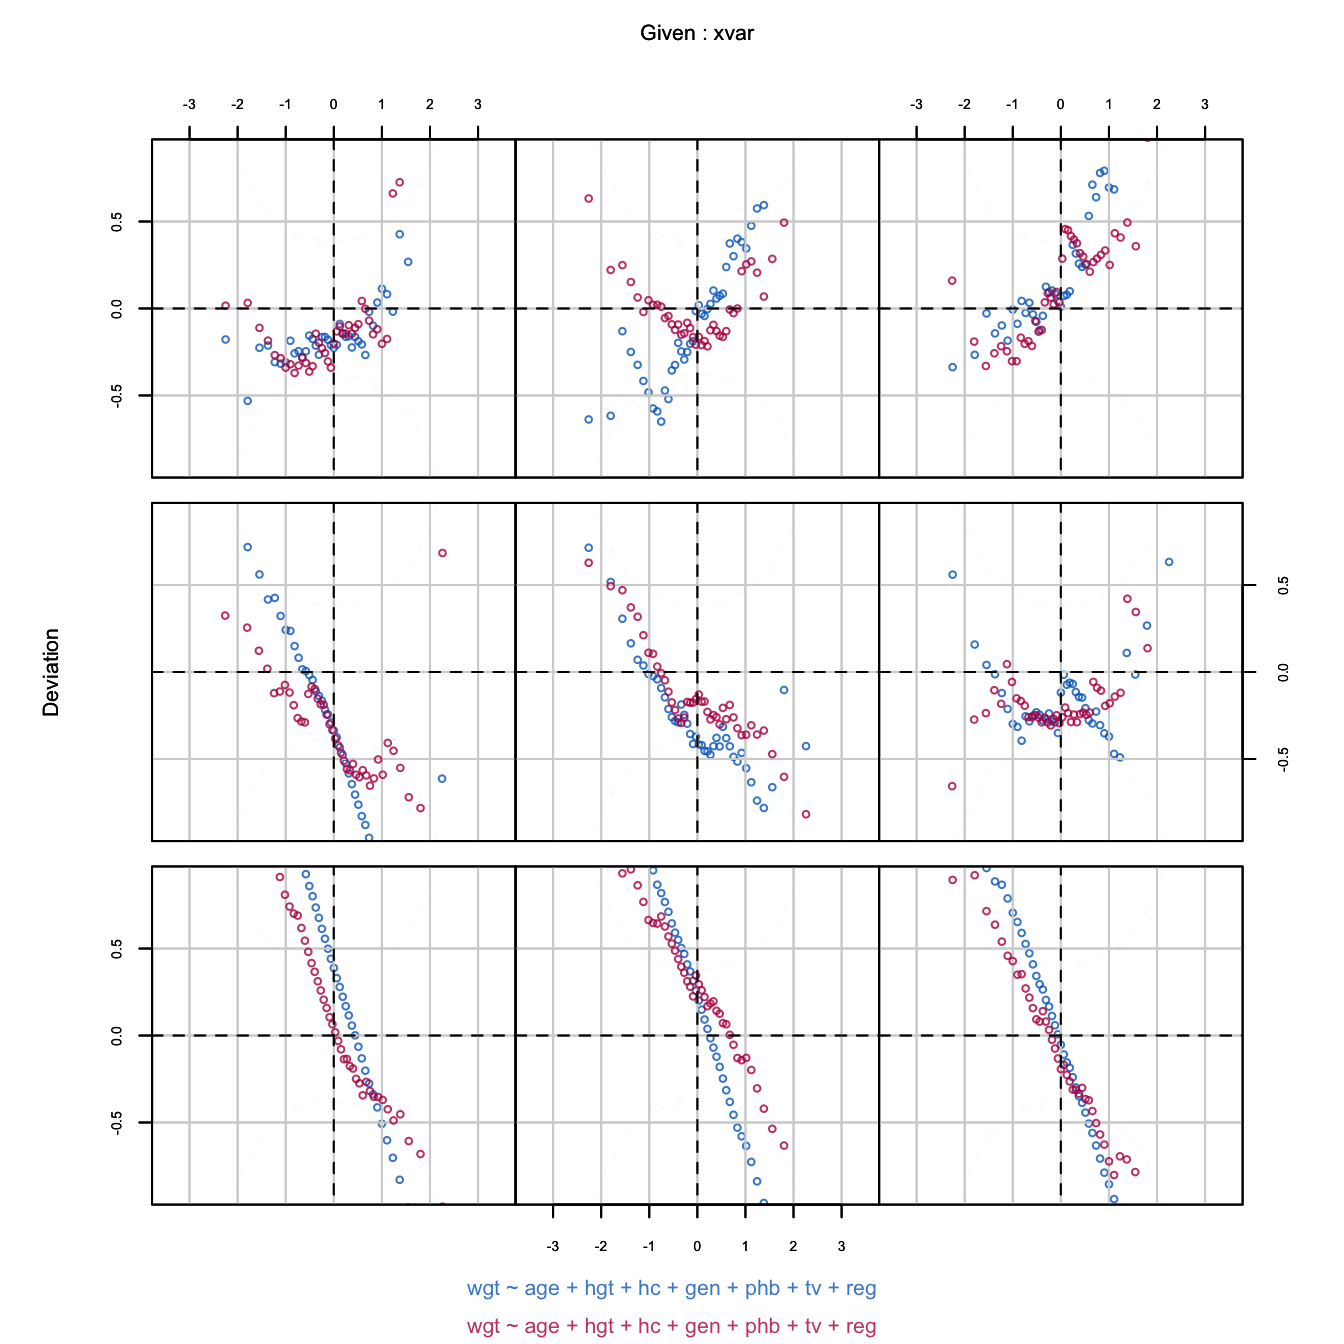 Worm plot of the predictive mean matching imputations for body weight. Different panels correspond to different age ranges. While the imputation model does not fit the data in many age groups, the distributions of the observed and imputed data often match up very well.